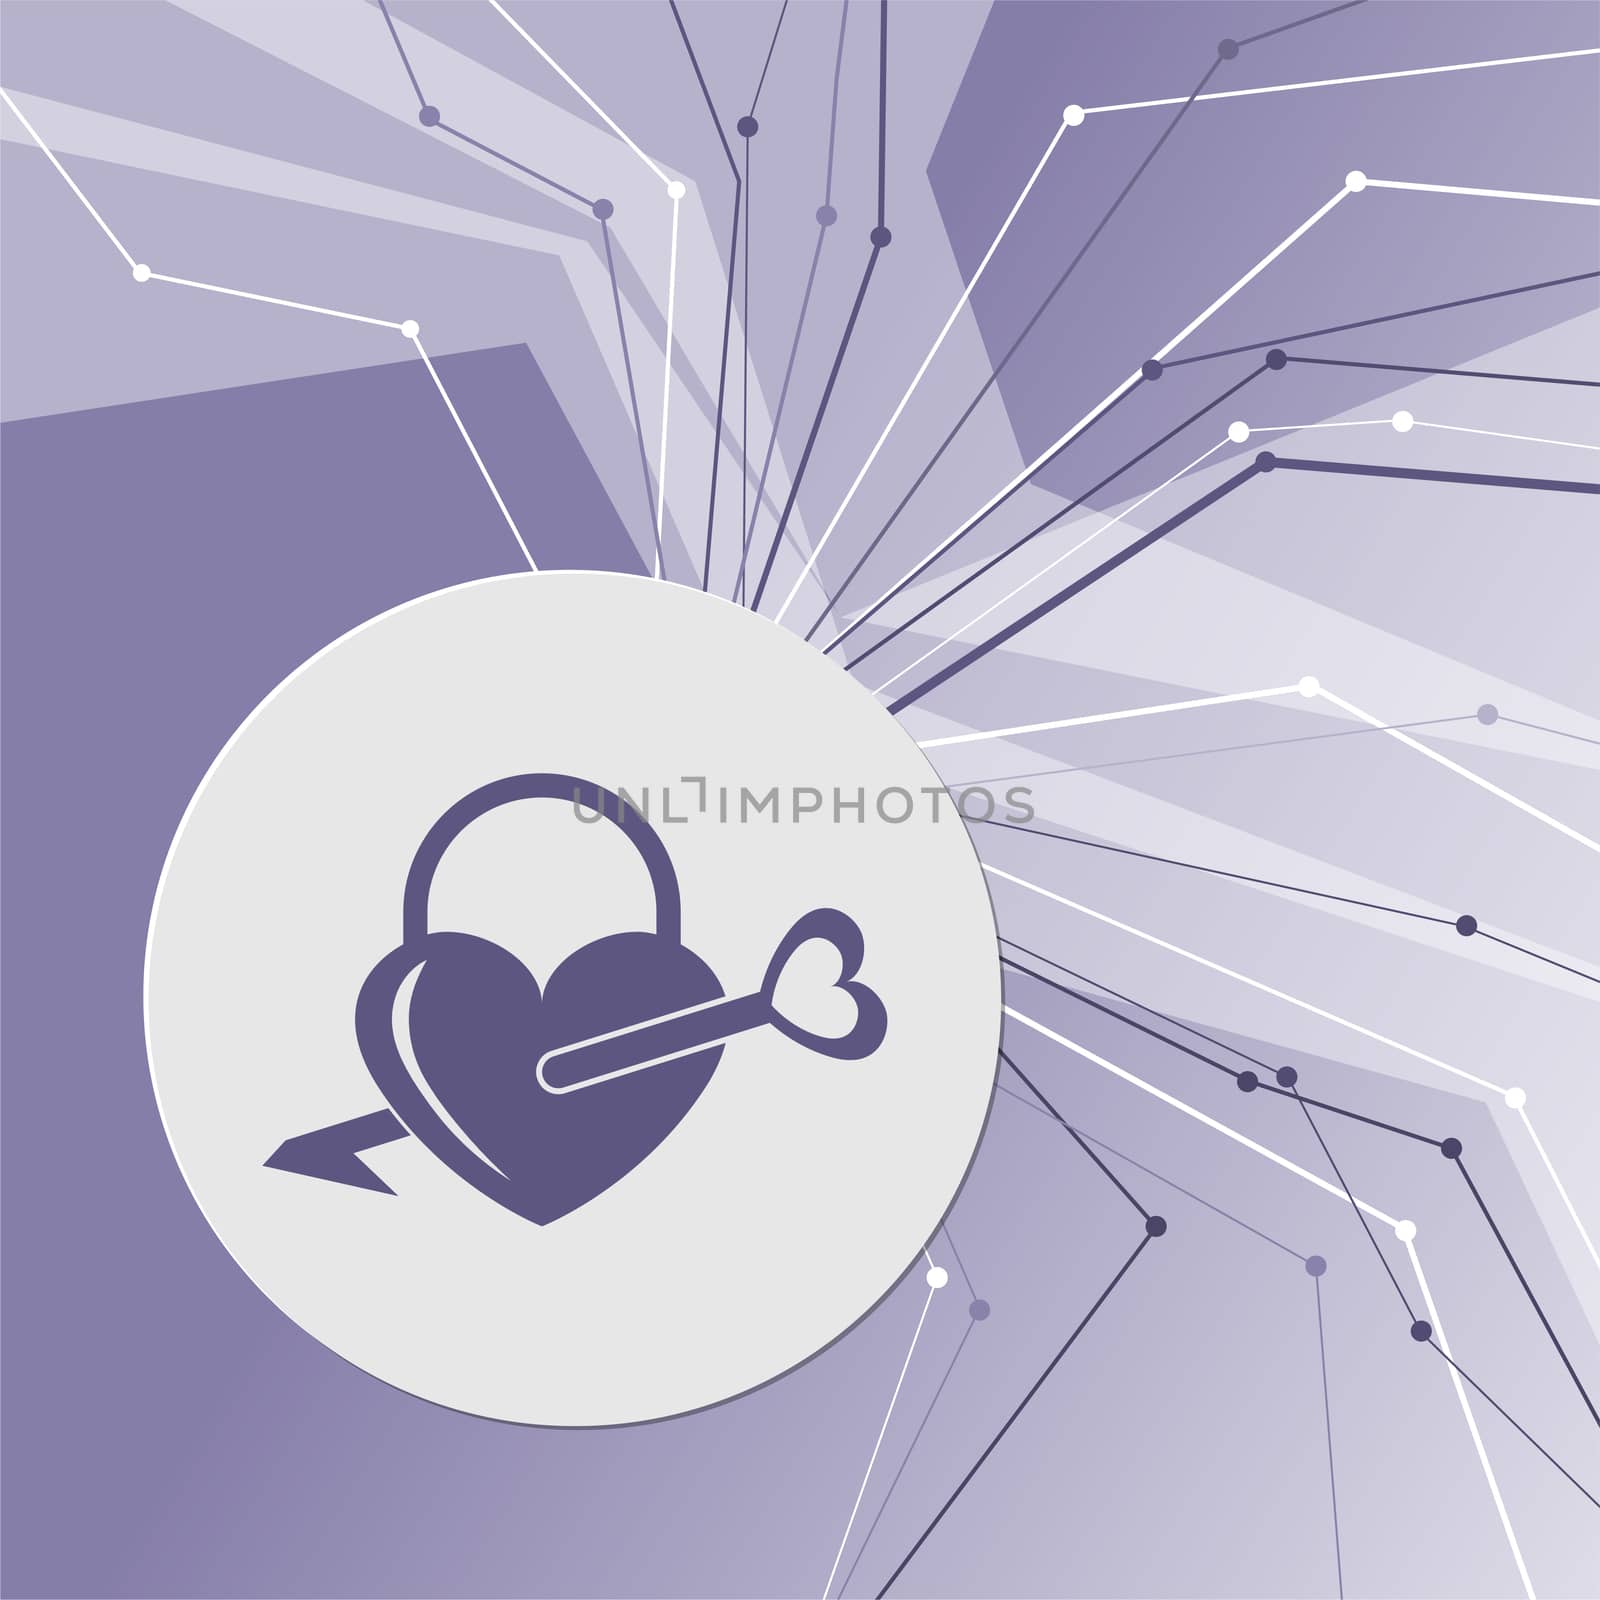 lock icons. A simple silhouette of the lock for the door. Shape of a heart. on purple abstract modern background. The lines in all directions. With room for your advertising.  by Adamchuk